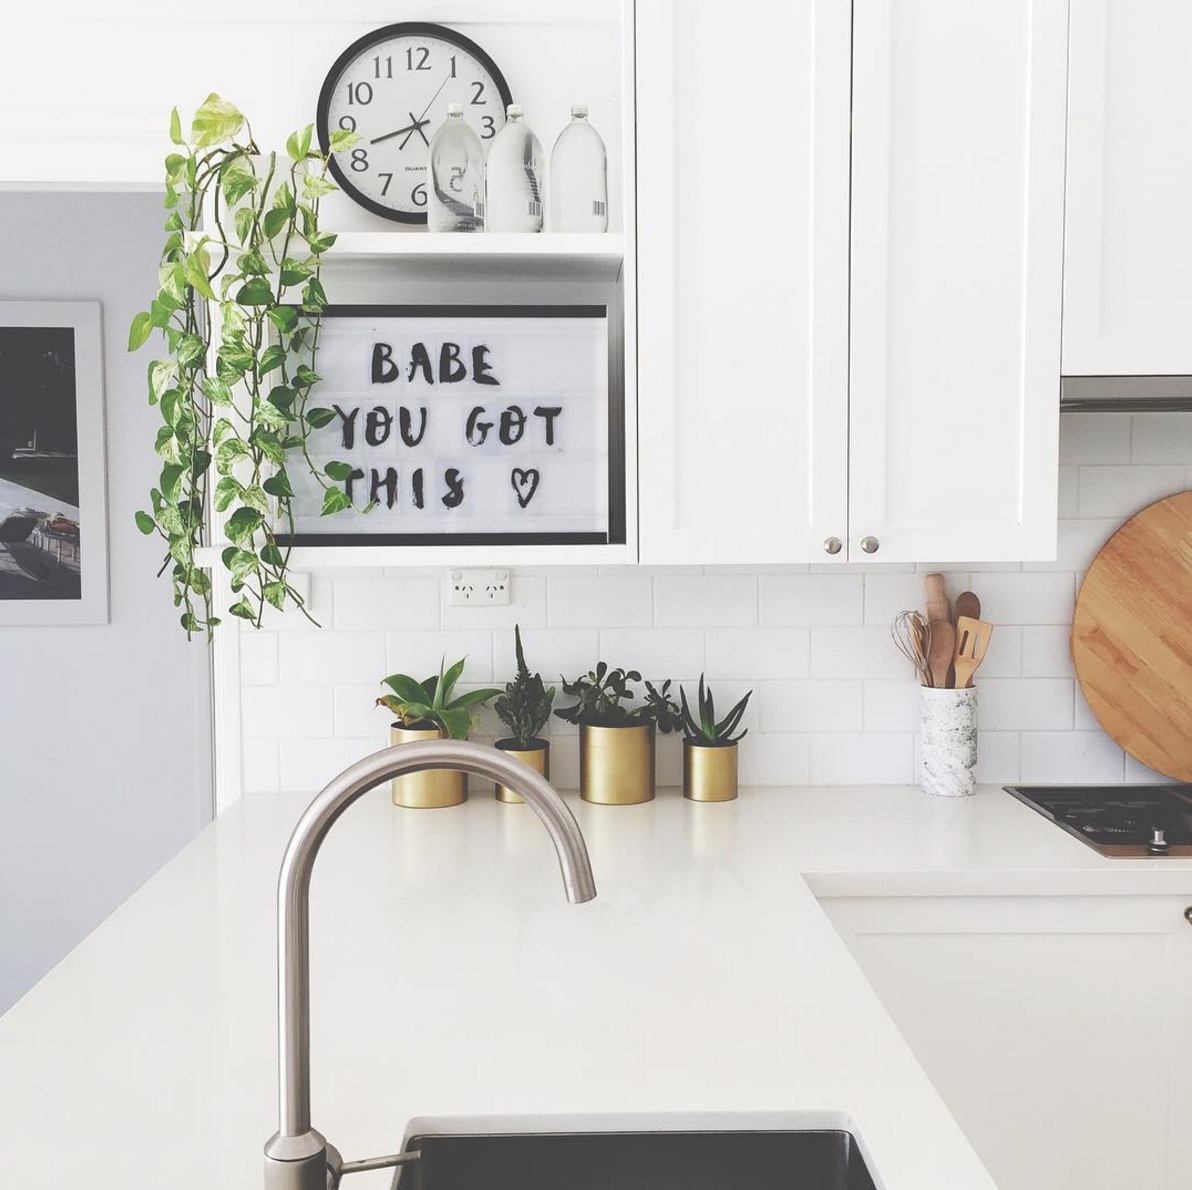 The Coolest Customizable Art: Felt Letter Boards and Black Light Boxes, plus where to buy them. (Babe You Got This Black Light Box in the Kitchen)